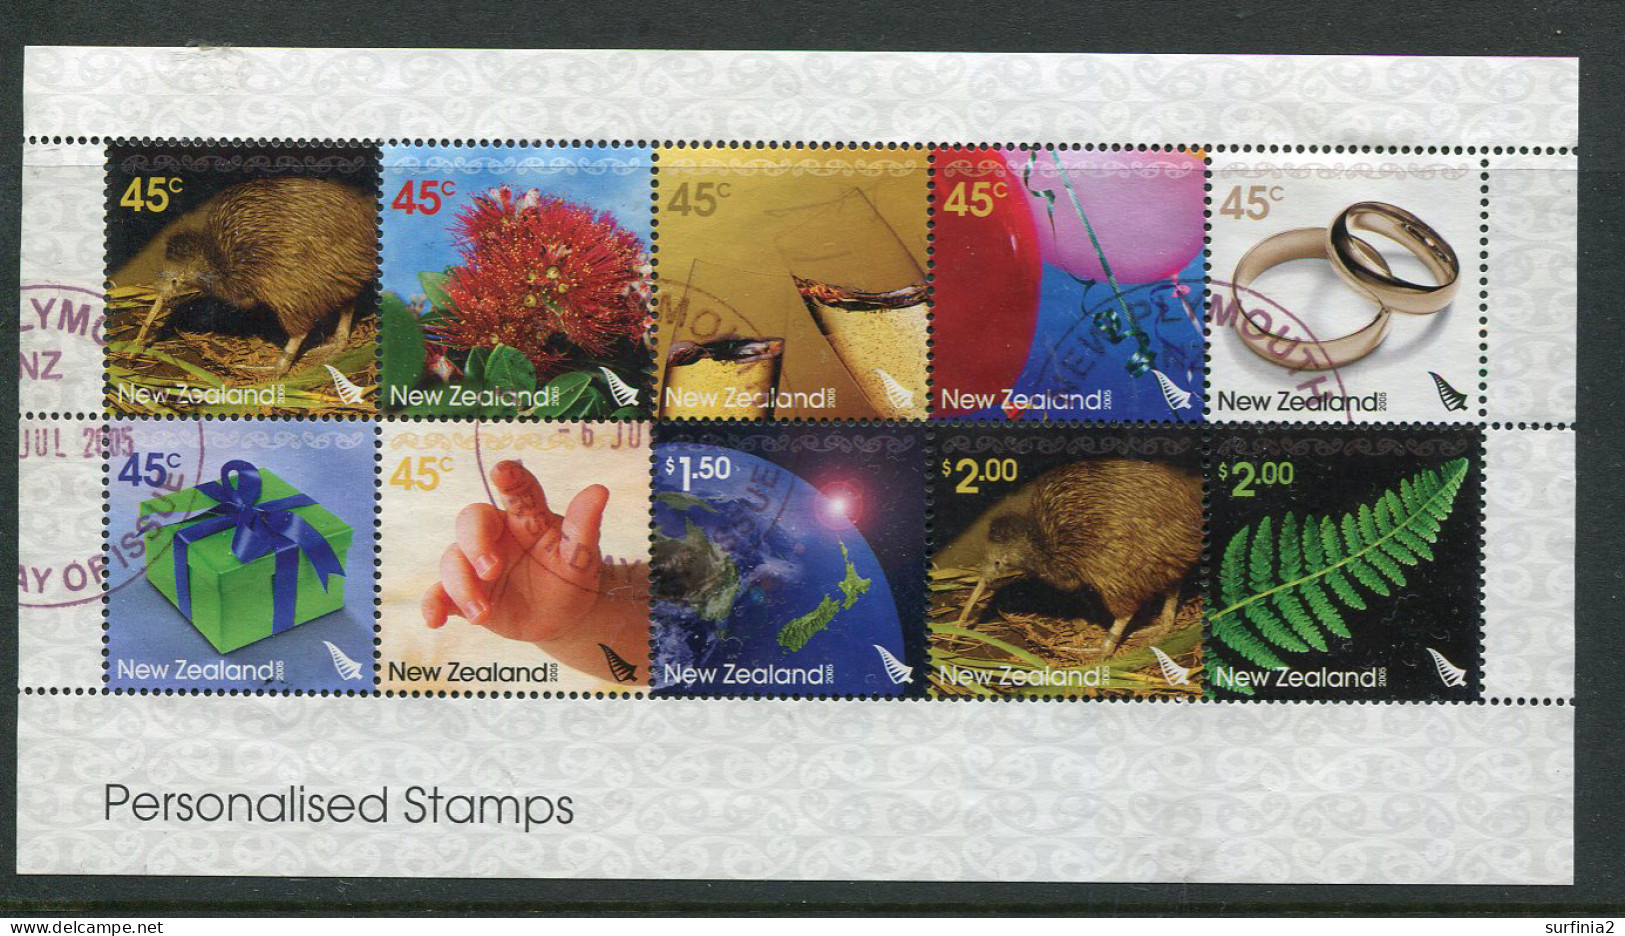 NEW ZEALAND 2005 PERSONALISED STAMPS SHEET 2801-10 FU - Used Stamps